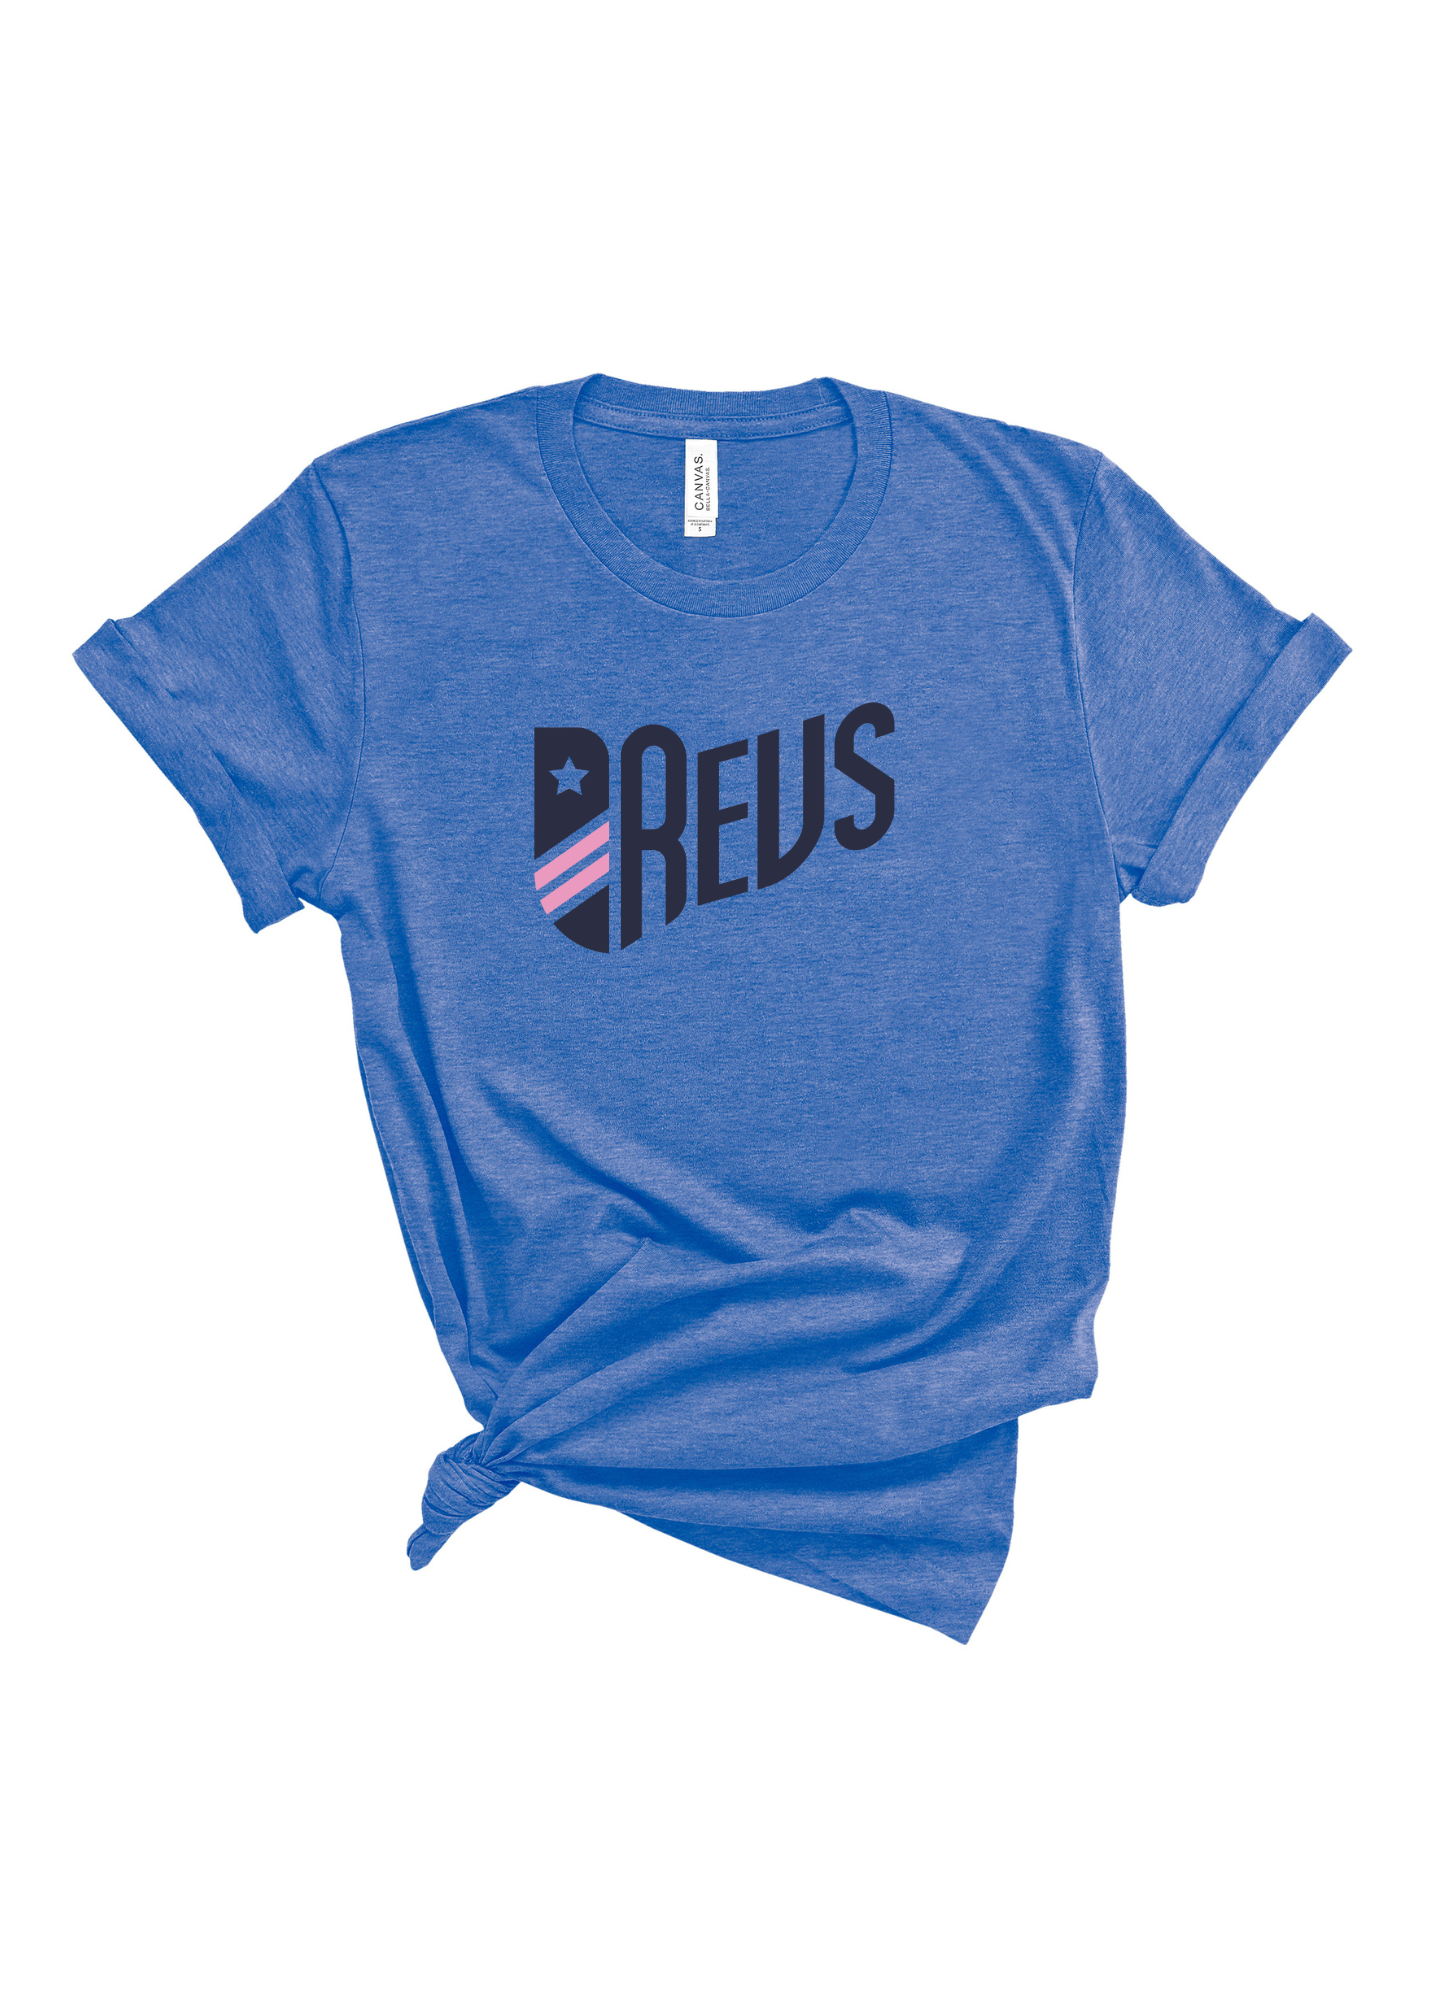 Revs | Adult Tee-Adult Tee-Sister Shirts-Sister Shirts, Cute & Custom Tees for Mama & Littles in Trussville, Alabama.